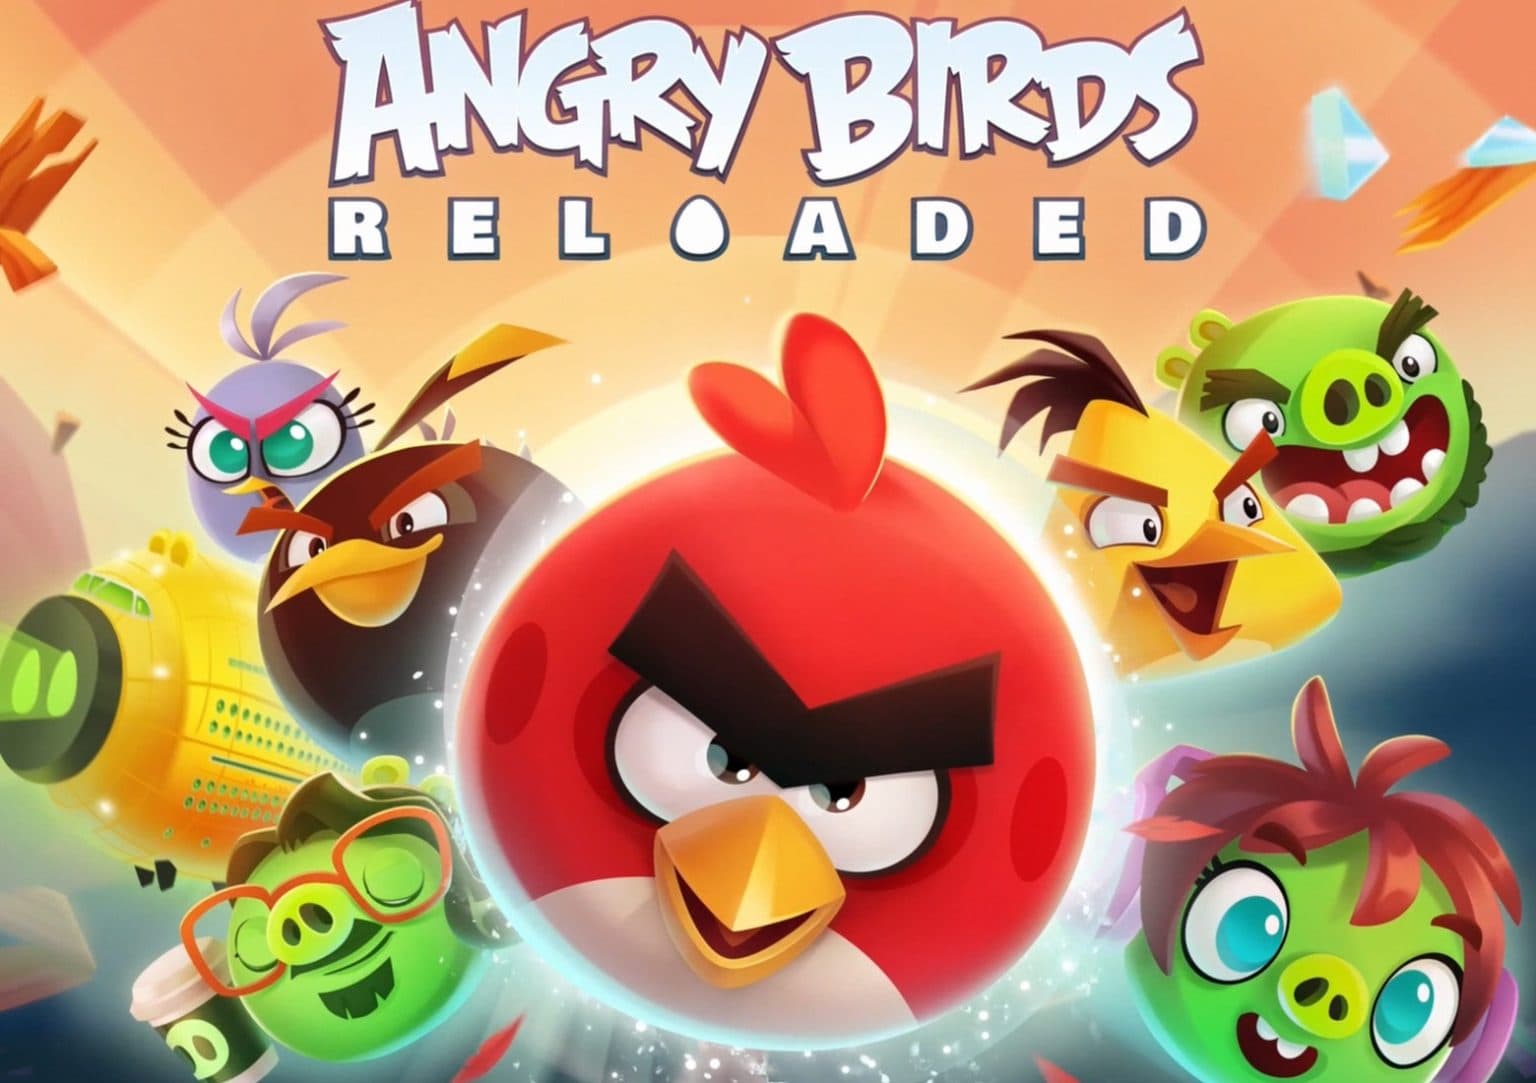 ‘Angry Birds Reloaded’ is coming soon to Apple Arcade.